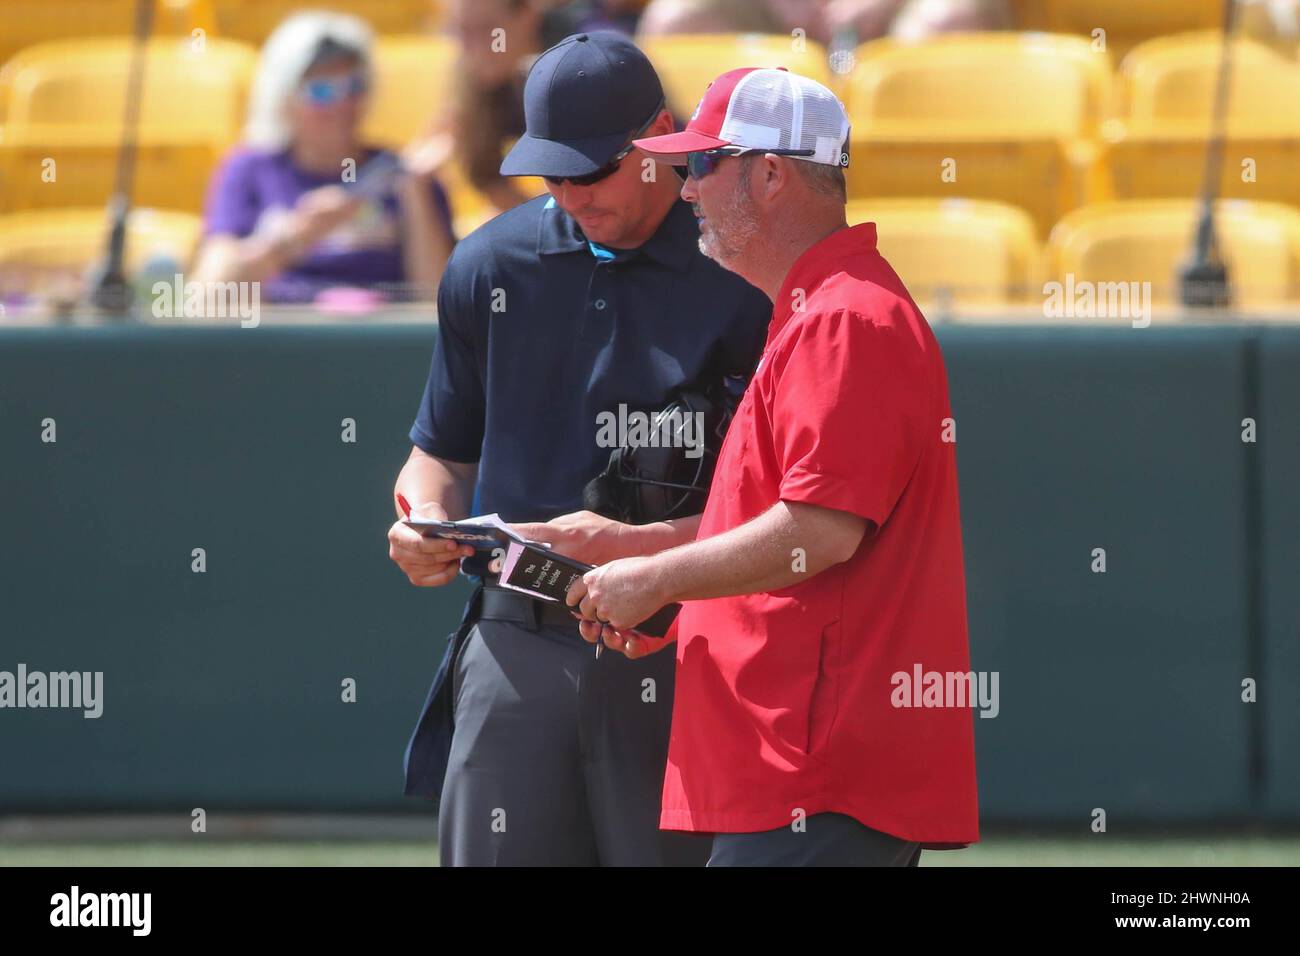 Baton Rouge, LA, USA. 6th Mar, 2022. Louisiana Tech Head Coach Josh Taylor meets with home plate umpire Brian Crochet to make a lineup change during NCAA Softball action between the Louisiana Tech Bulldogs and the LSU Tigers at Tiger Park in Baton Rouge, LA. Jonathan Mailhes/CSM/Alamy Live News Stock Photo